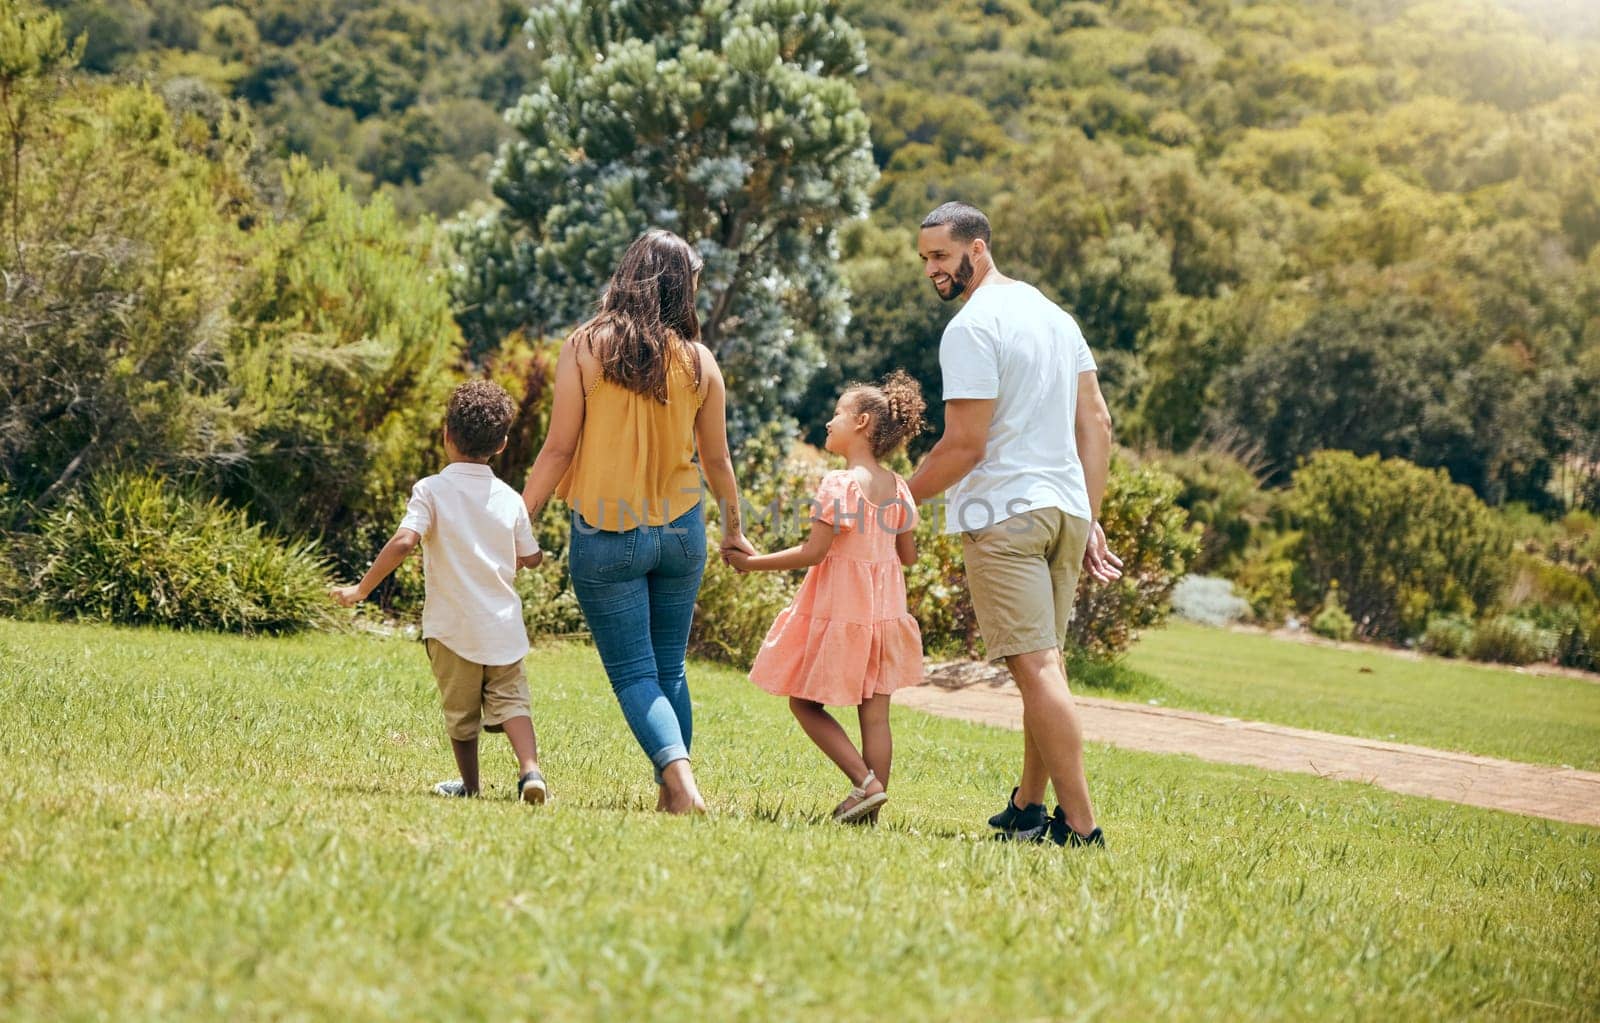 Family, kids and walking in the park for bonding, fun and care in summer outside. Mother, father and parents playfully walk with children, son and daughter siblings in a garden for bond.